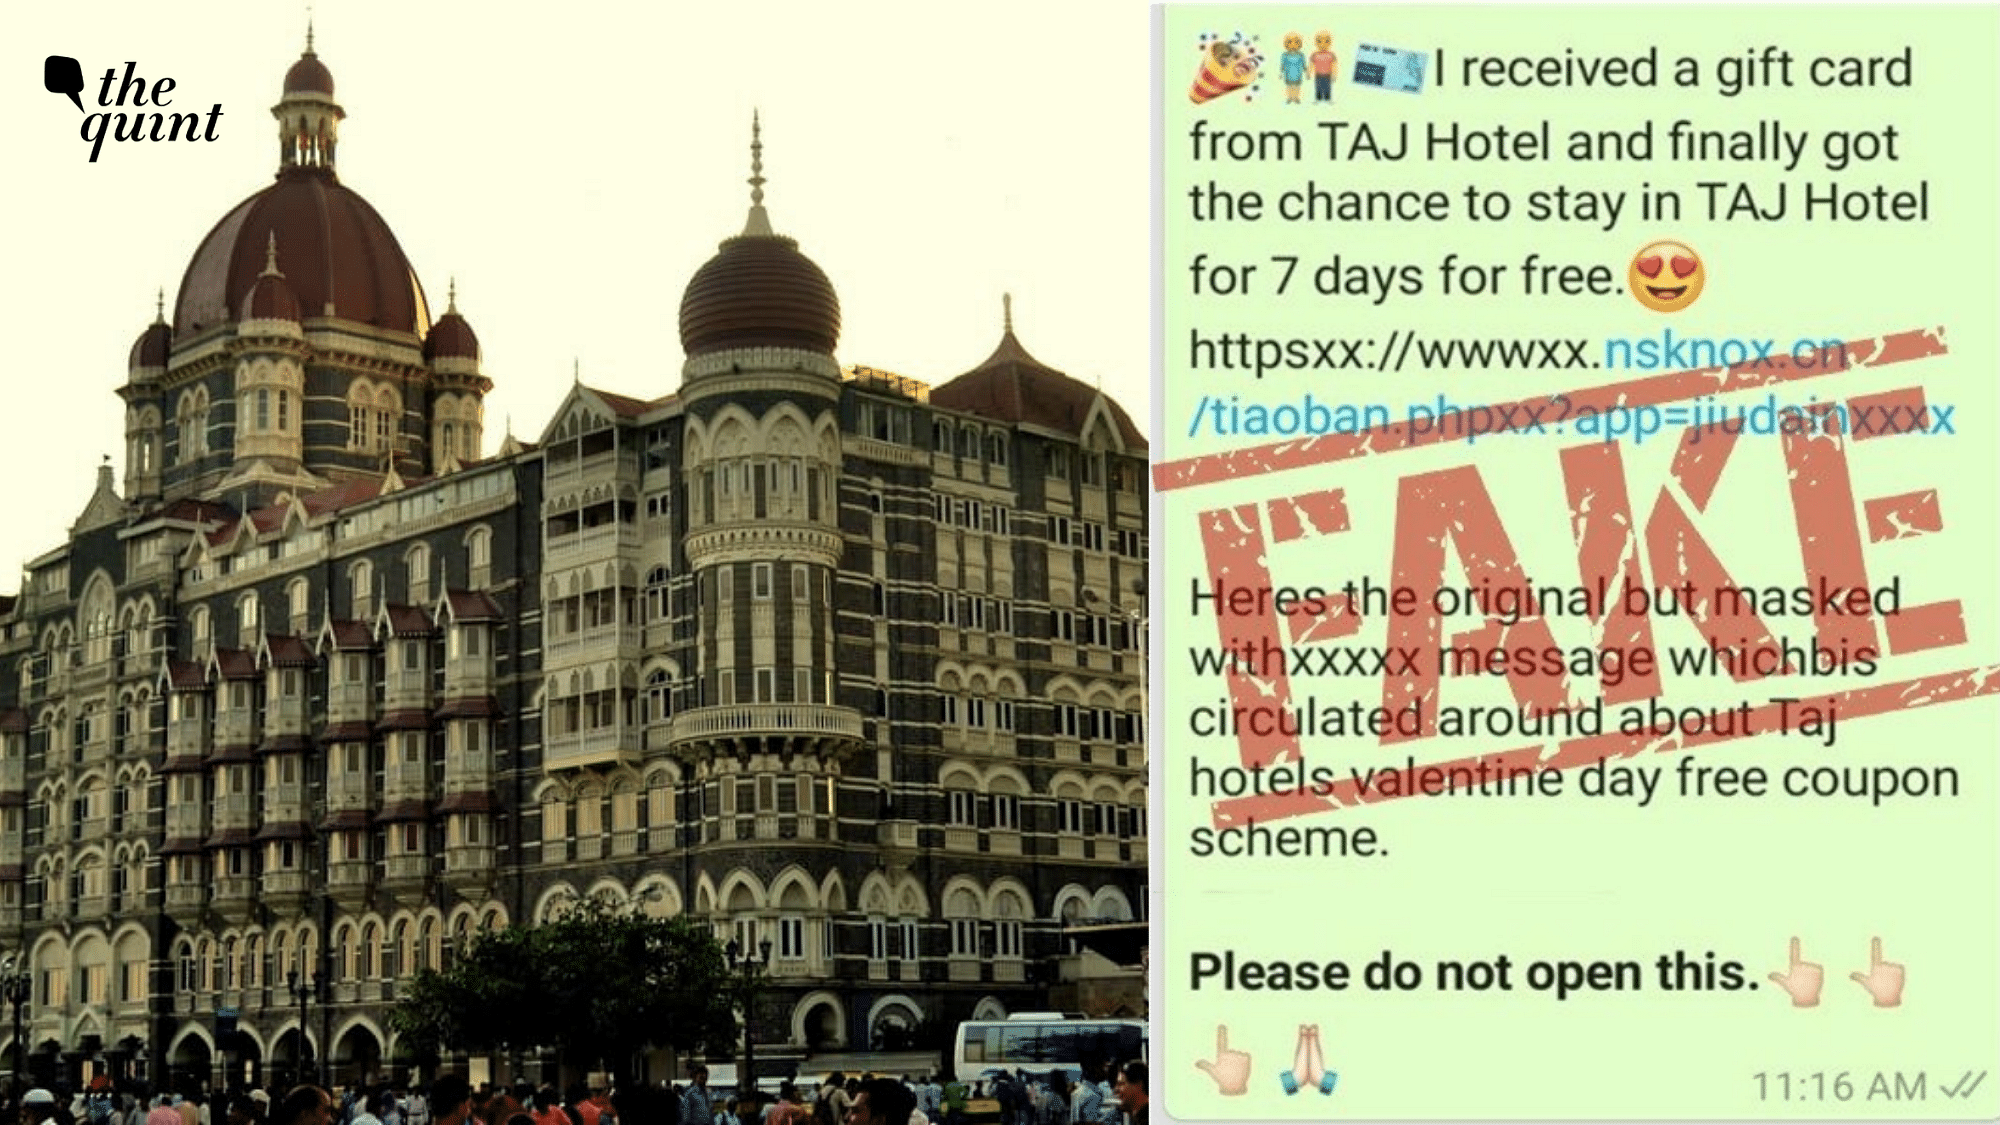 The Mumbai Police warns people to not open such links.